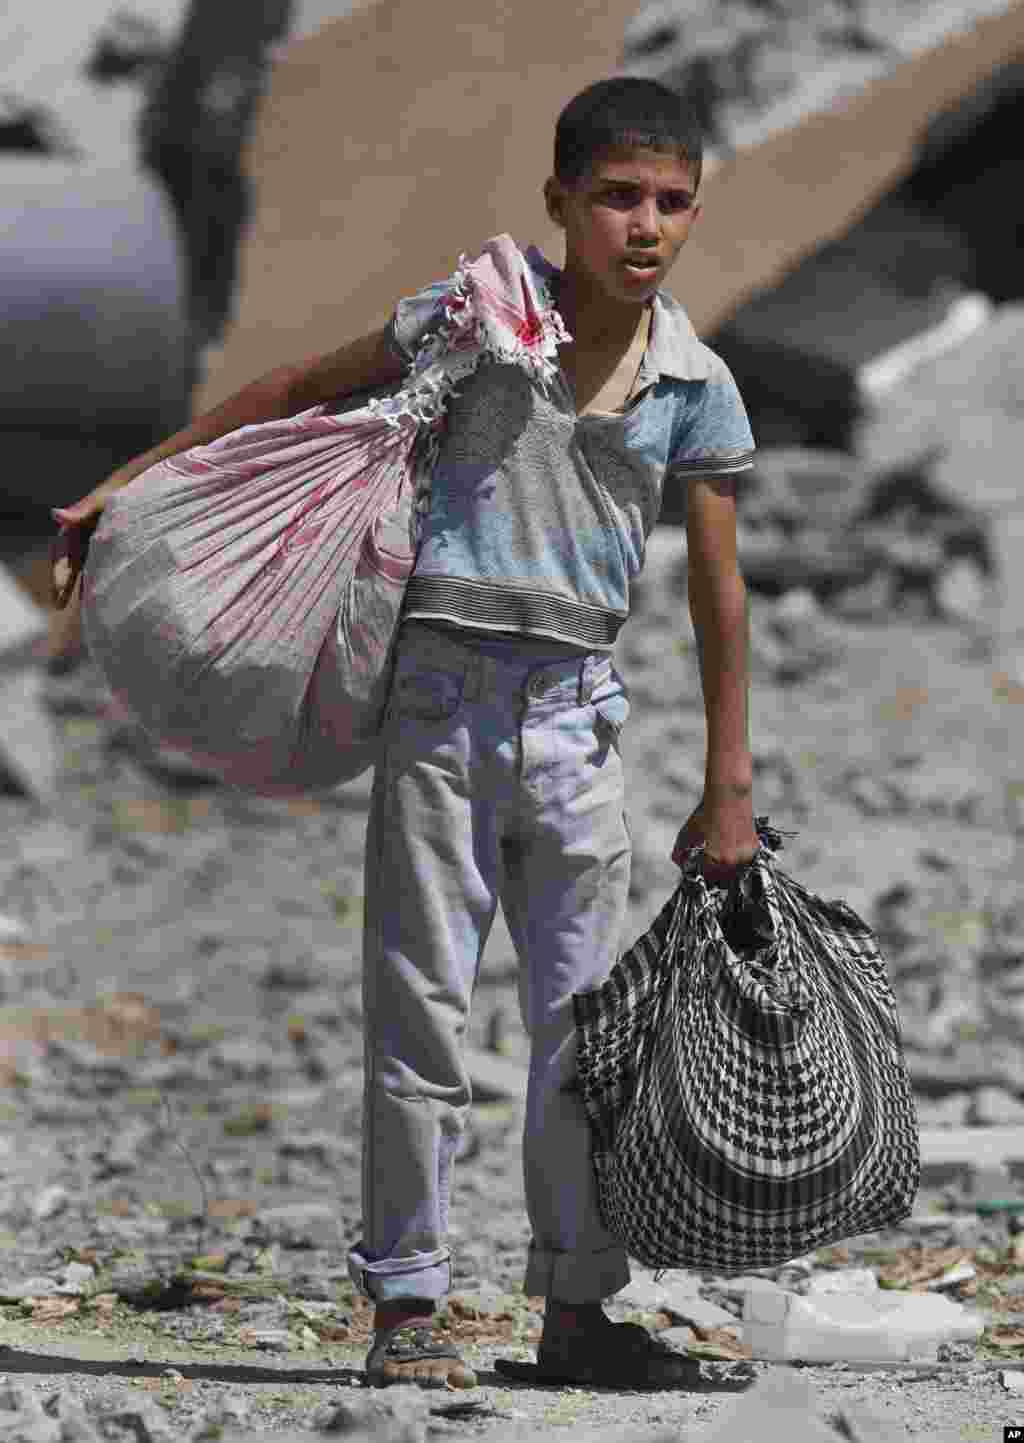 A Palestinian boy carries his belongings after salvaging them from his destroyed house, in the heavily bombed town of Beit Hanoun, Gaza Strip, close to the Israeli border, Aug. 1, 2014.